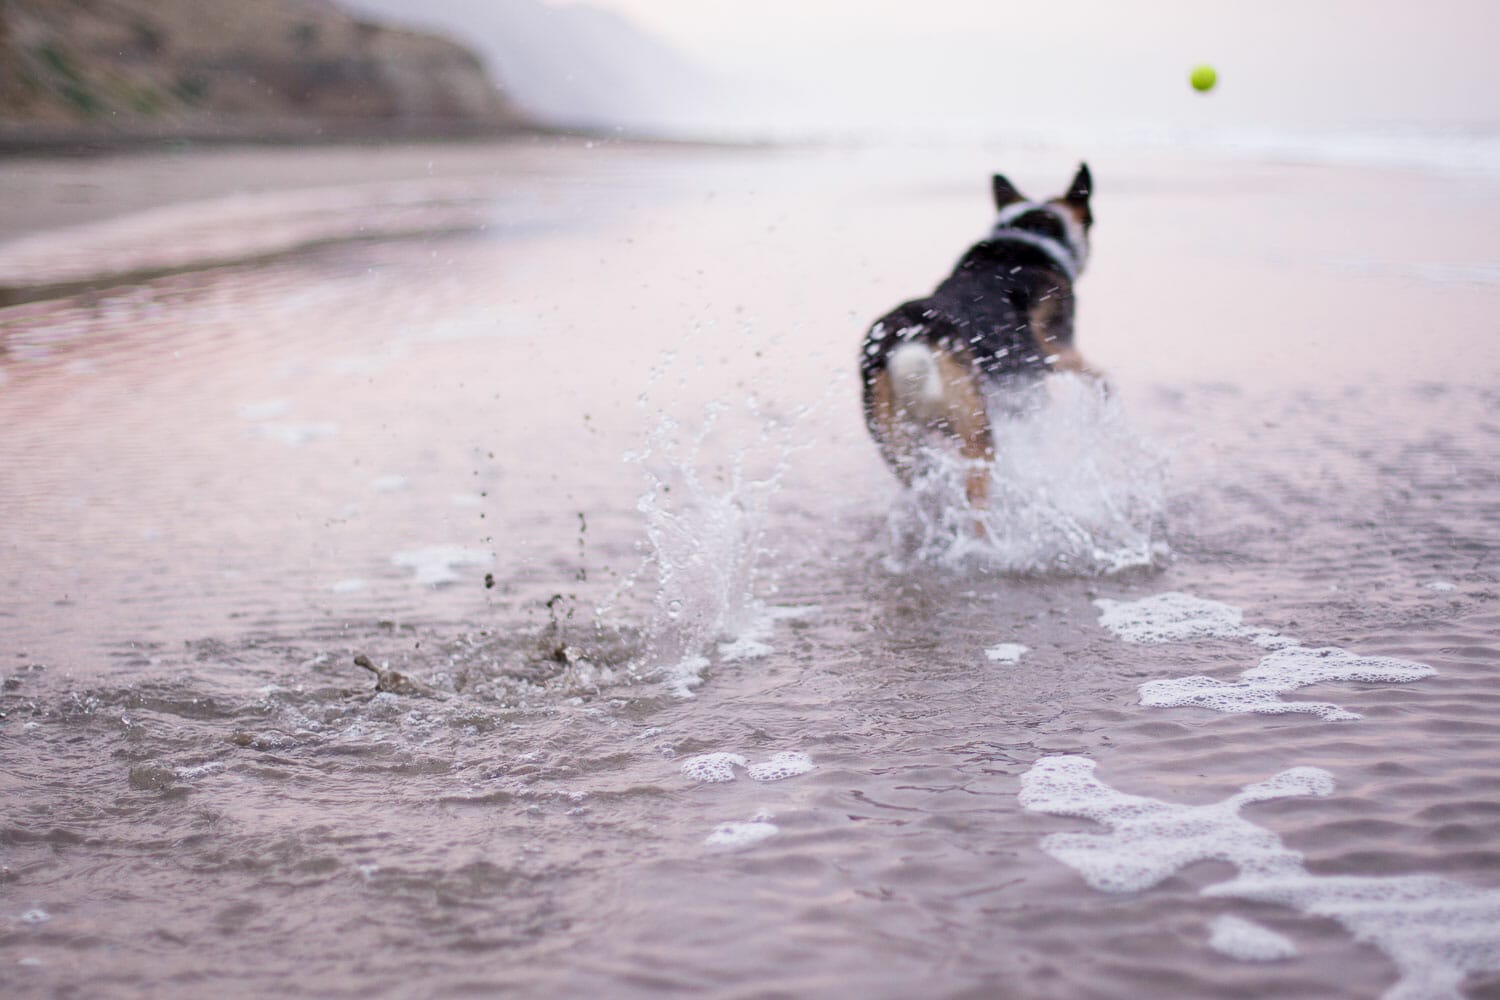 A dog chasing a ball in shallow beach water.